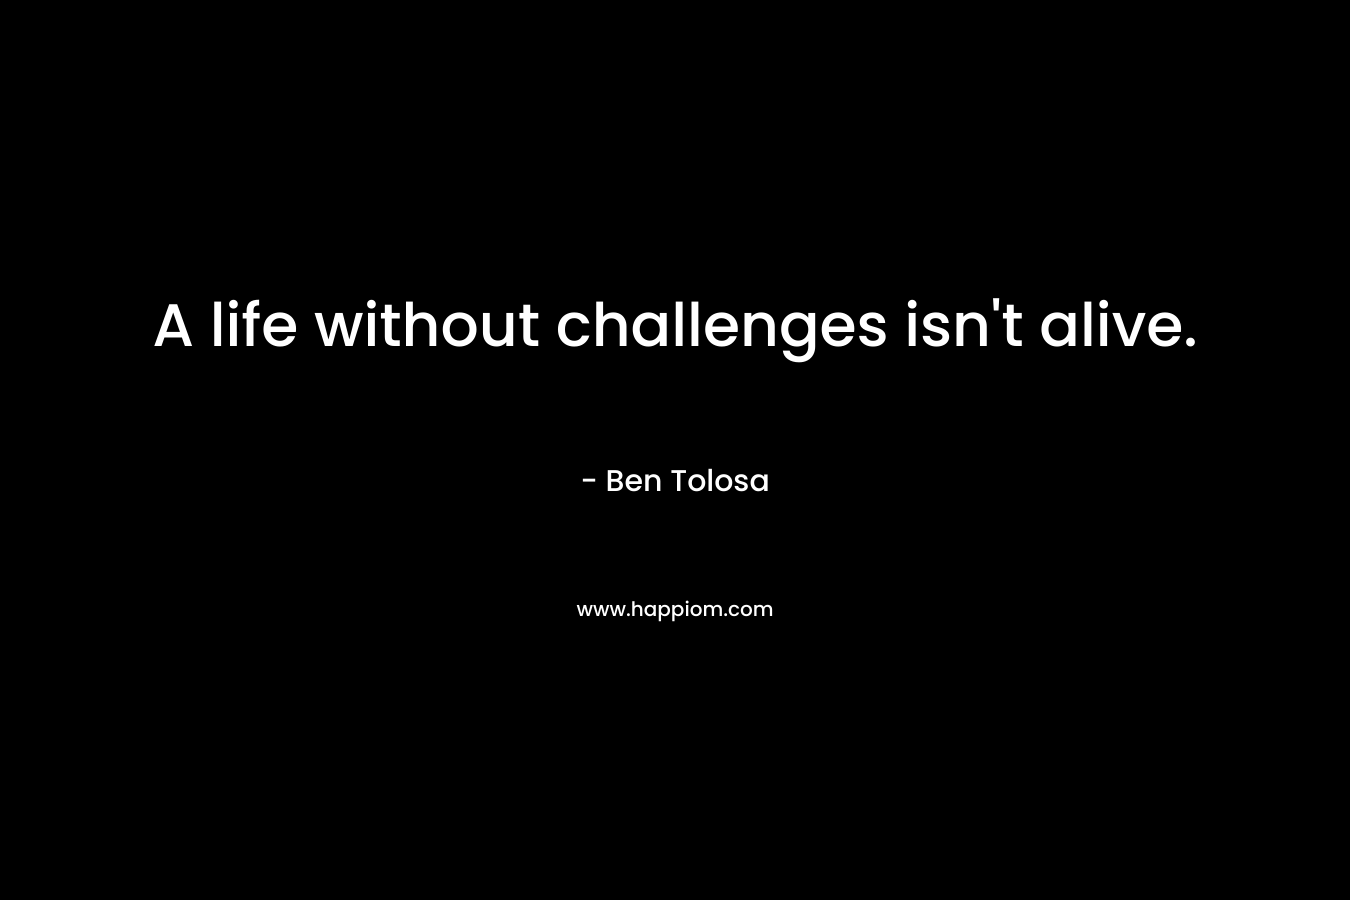 A life without challenges isn't alive.